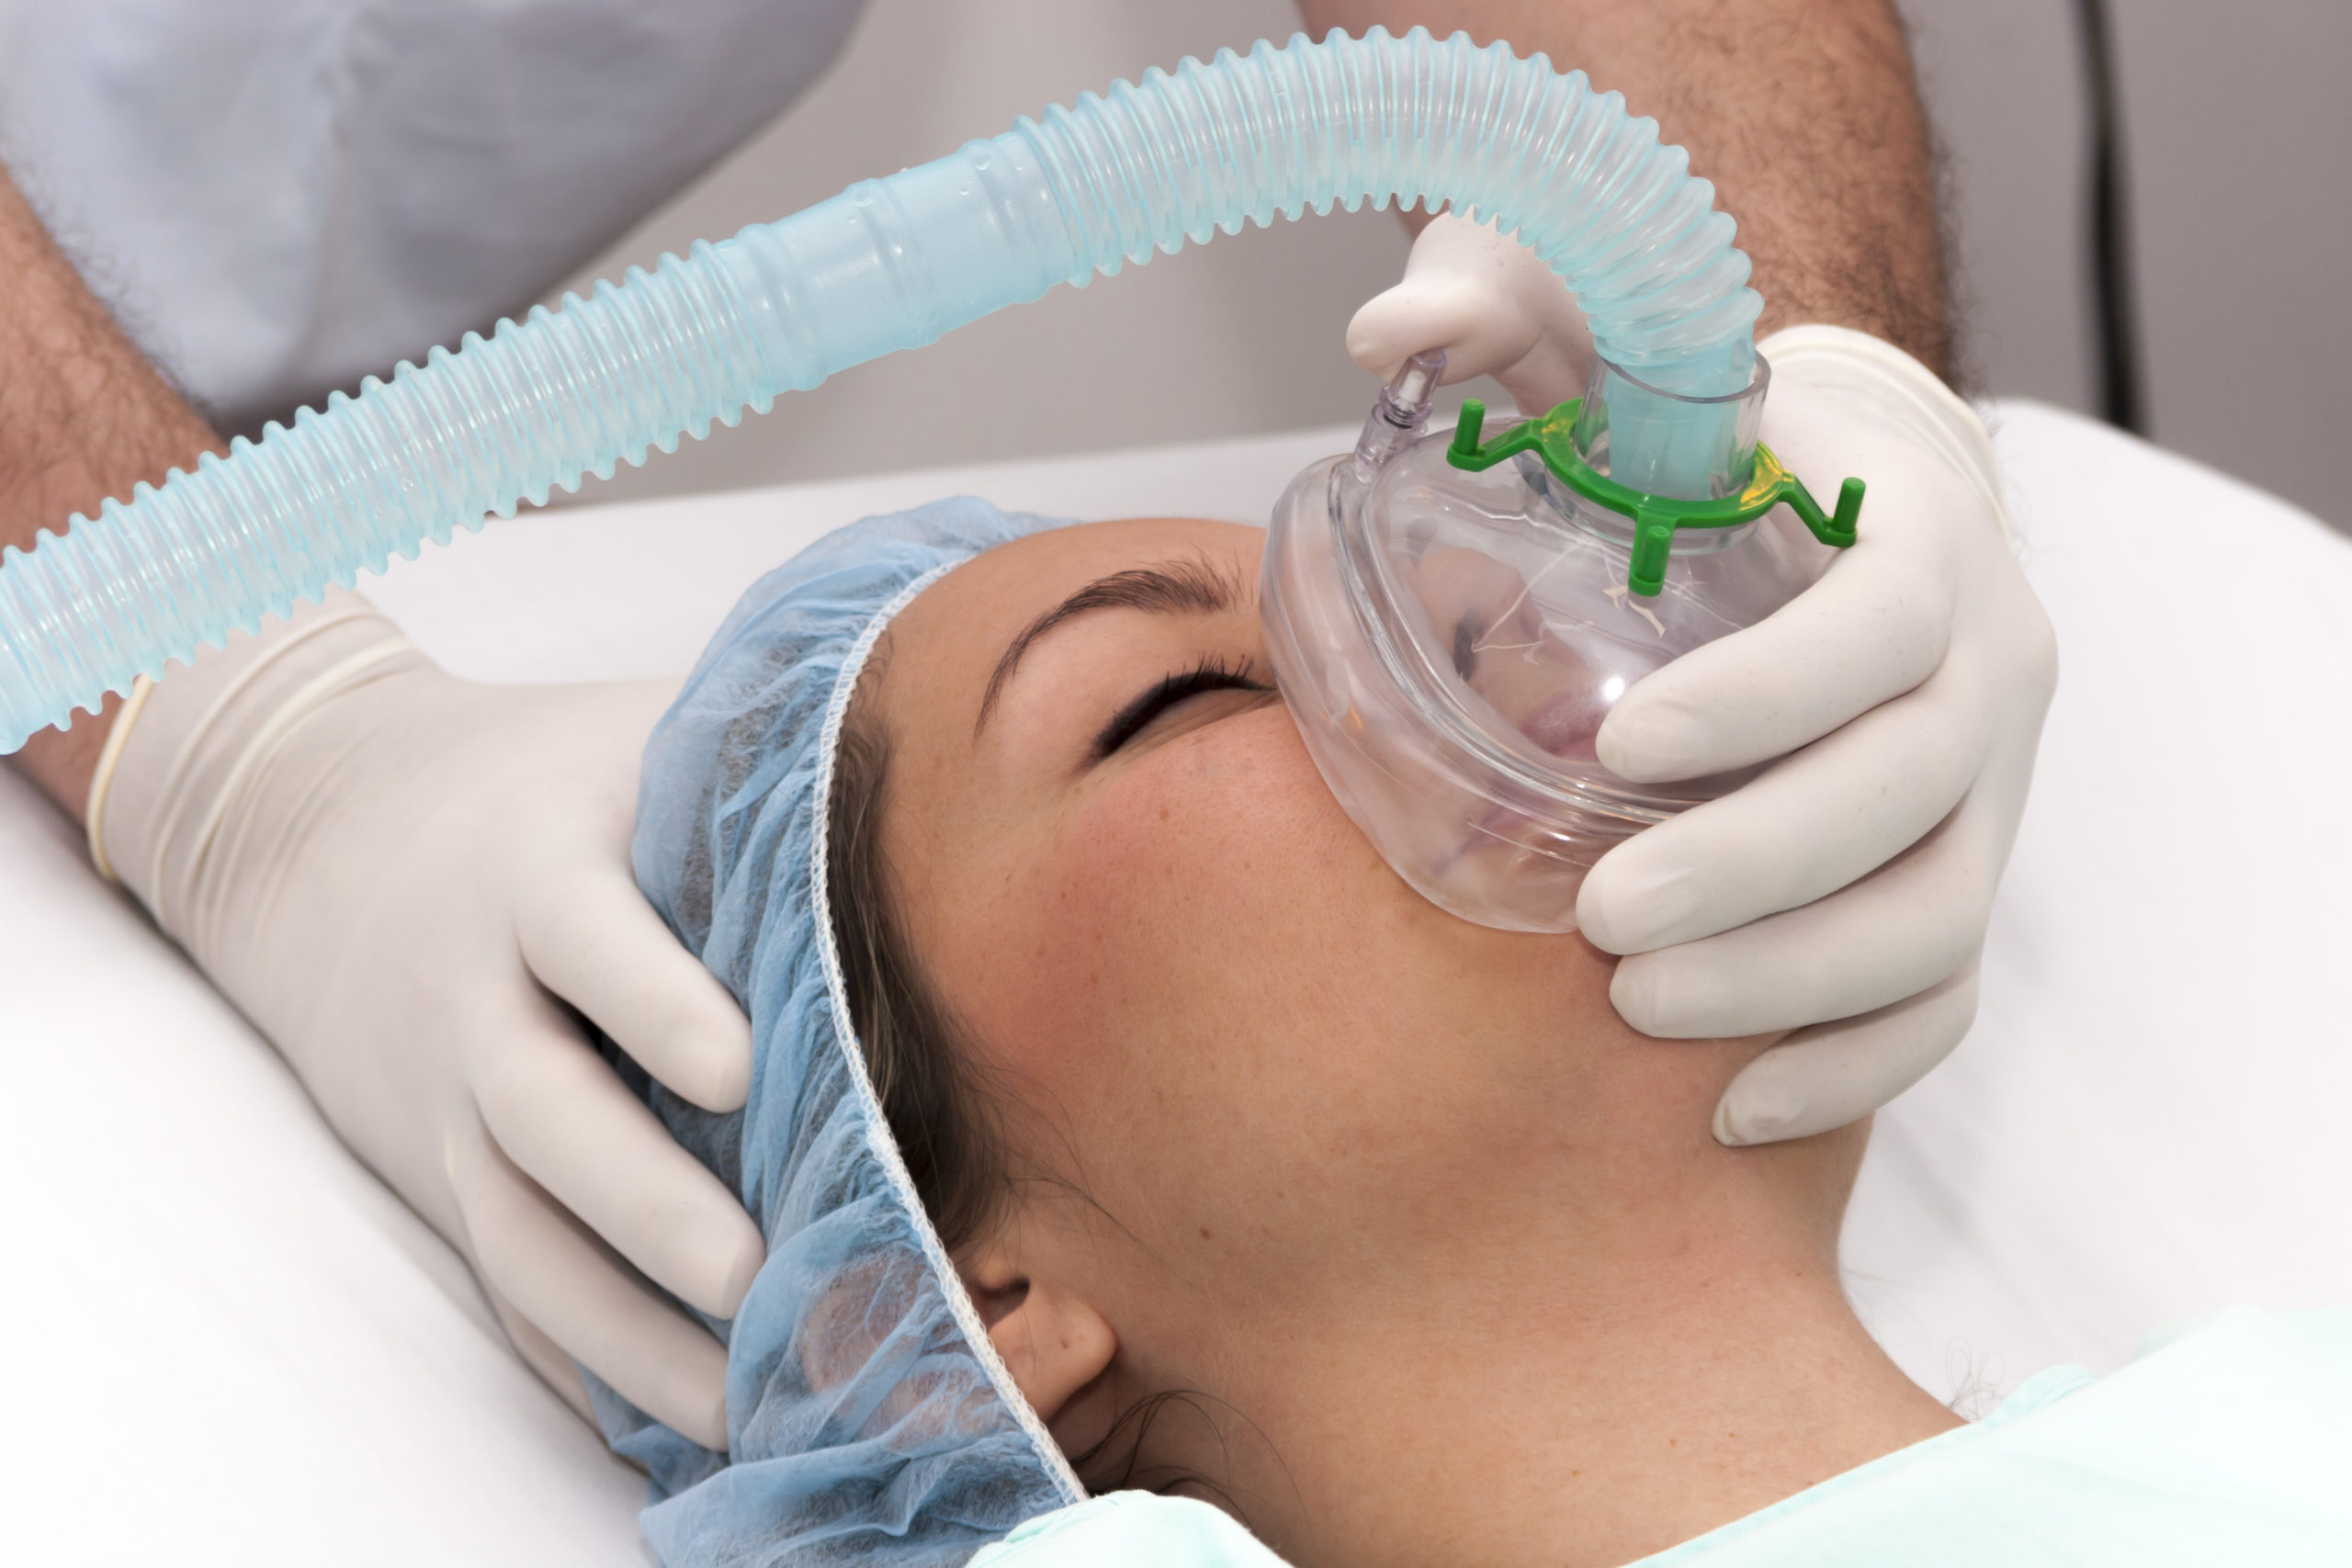 ClearFast PreOp types of anesthesia